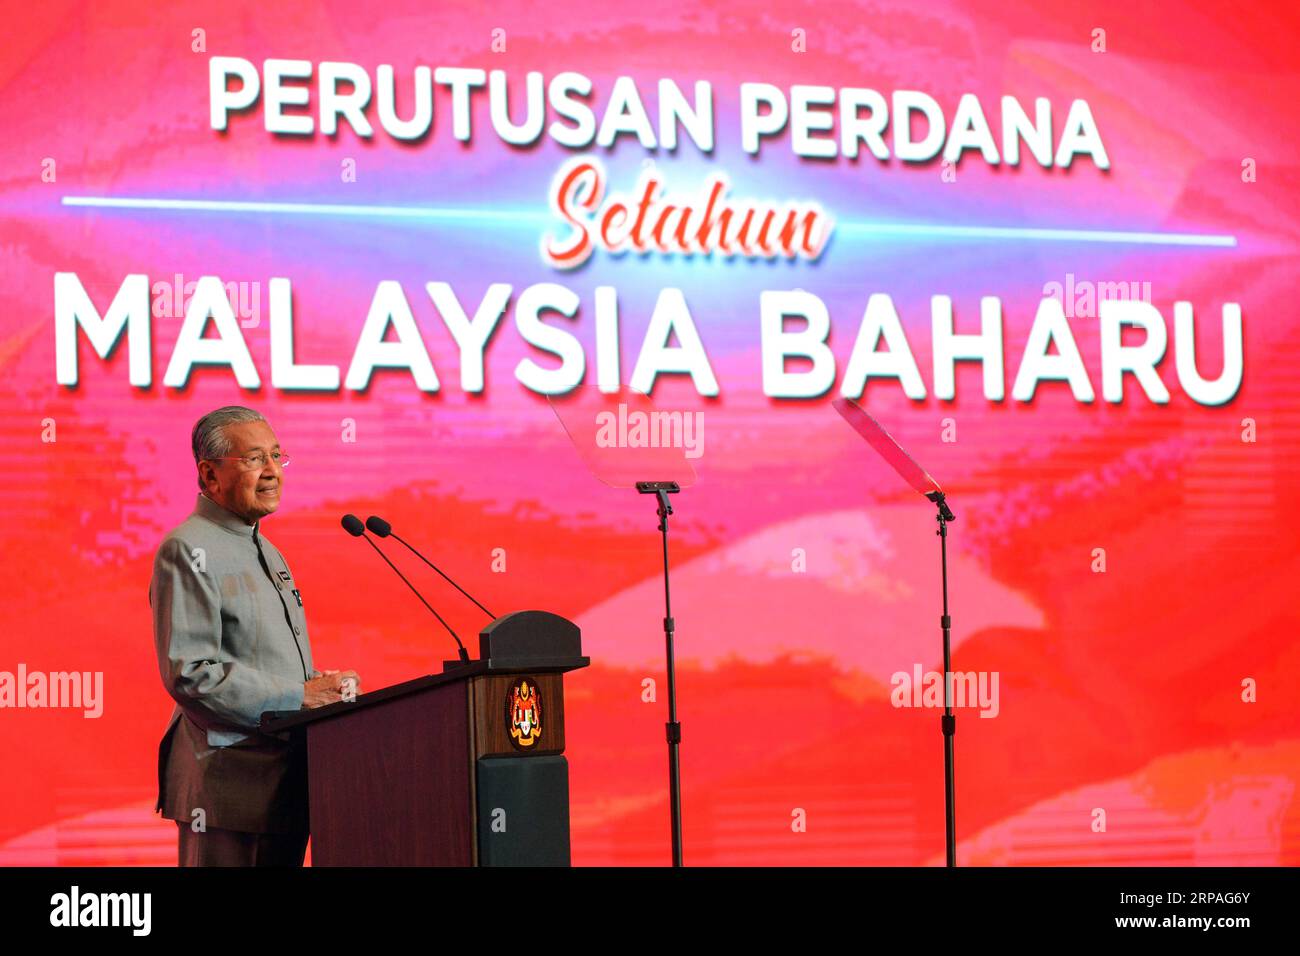 (190509) -- PUTRAJAYA, May 9, 2019 (Xinhua) -- Malaysian Prime Minister Mahathir Mohamad speaks at an event to mark the first year since his Pakatan Harapan (PH) coalition won power at the national polls on May 9 last year, in Putrajaya, Malaysia, May 9, 2019. Malaysia has achieved progress in combating corruption and in restoring government institutions after taking over the government in a smooth transition but much remains to be done especially in repairing the national economy, Malaysian Prime Minister Mahathir Mohamad said on Thursday. (Xinhua/Chong Voon Chung) MALAYSIA-PUTRAJAYA-PRIME MI Stock Photo